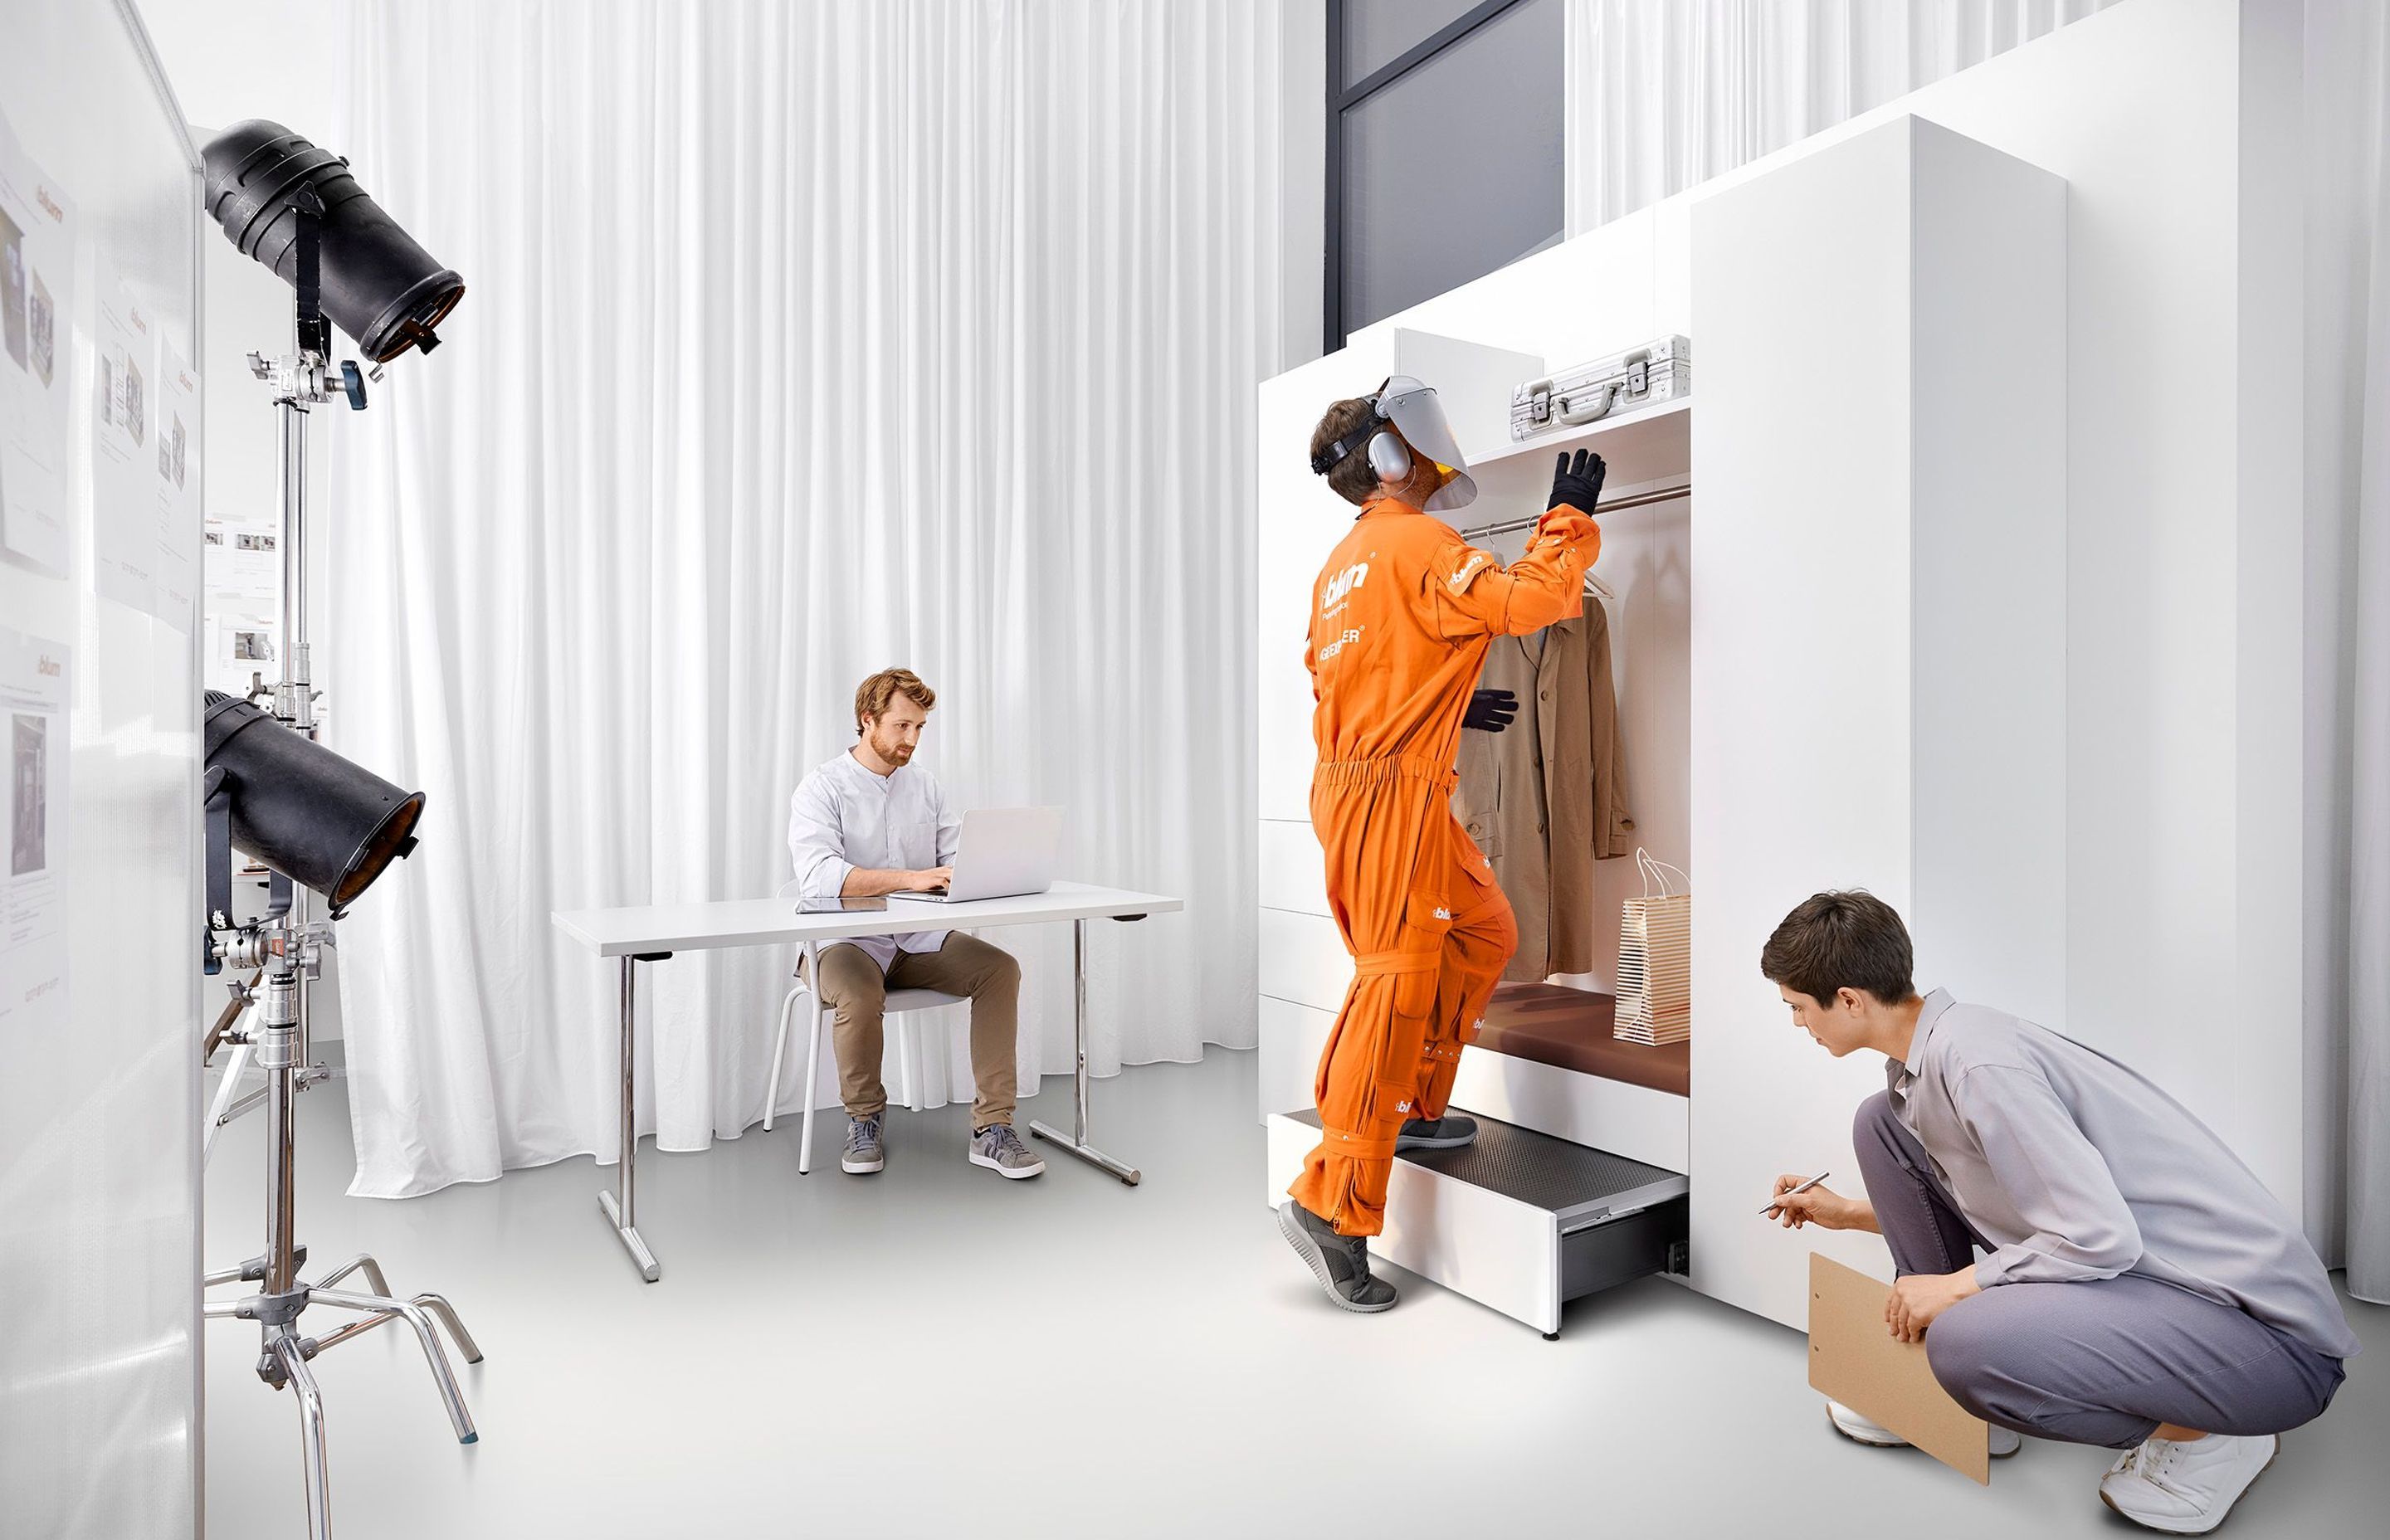 Future-proofing a living space with ergonomic design for everybody